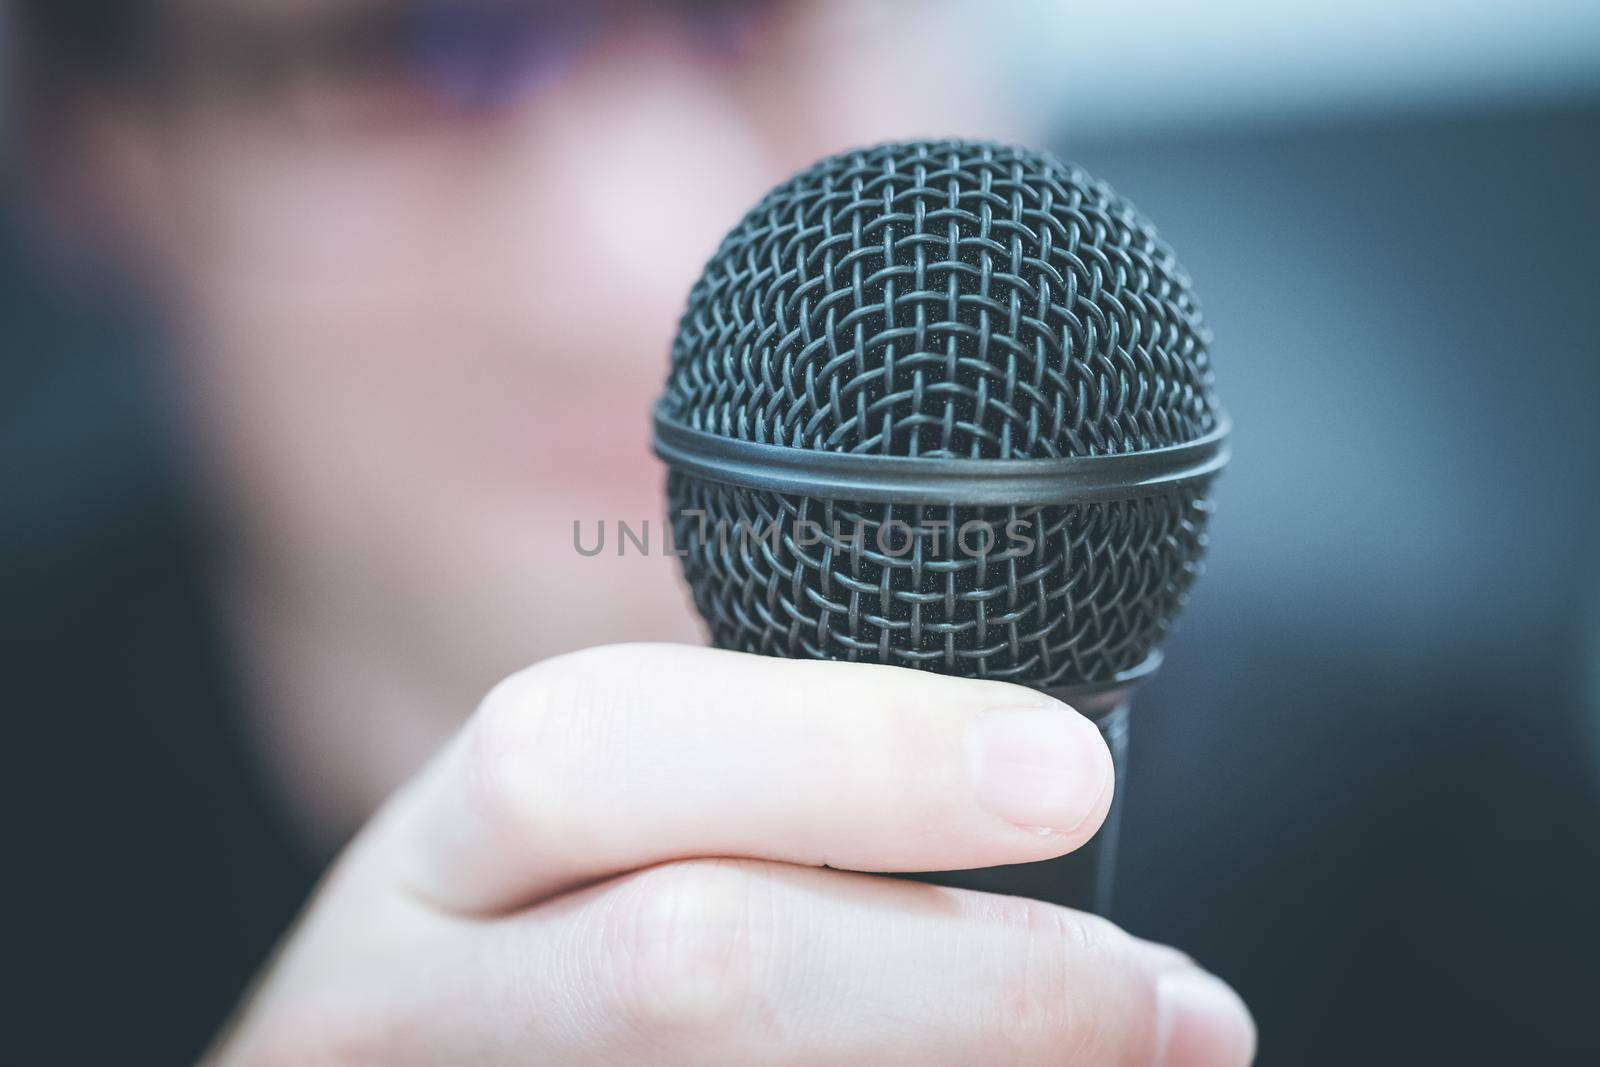 Speaking in the microphone: Young man with blurry face is taking into the microphone by Daxenbichler